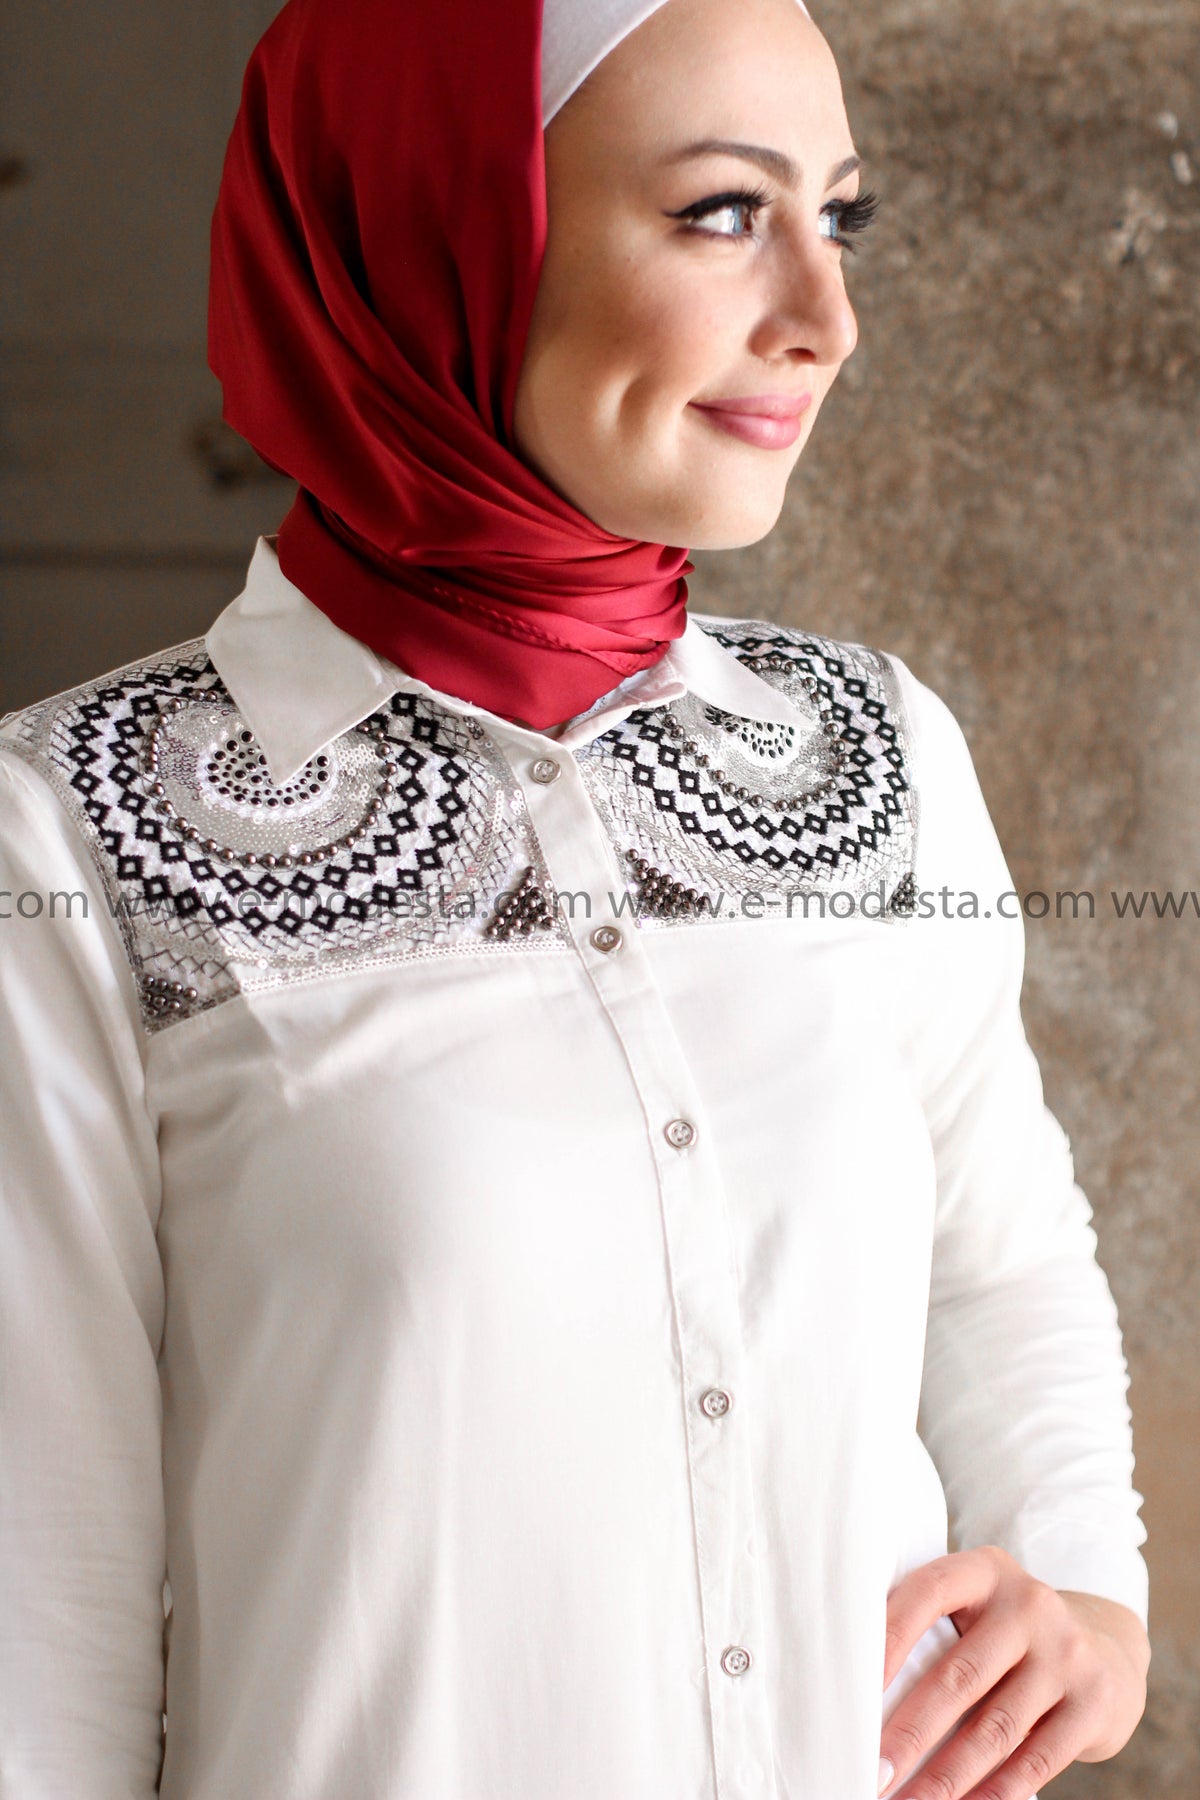 White Mid-Length Shirt with Beads and Rhinestone Embroidery - E-Modesta